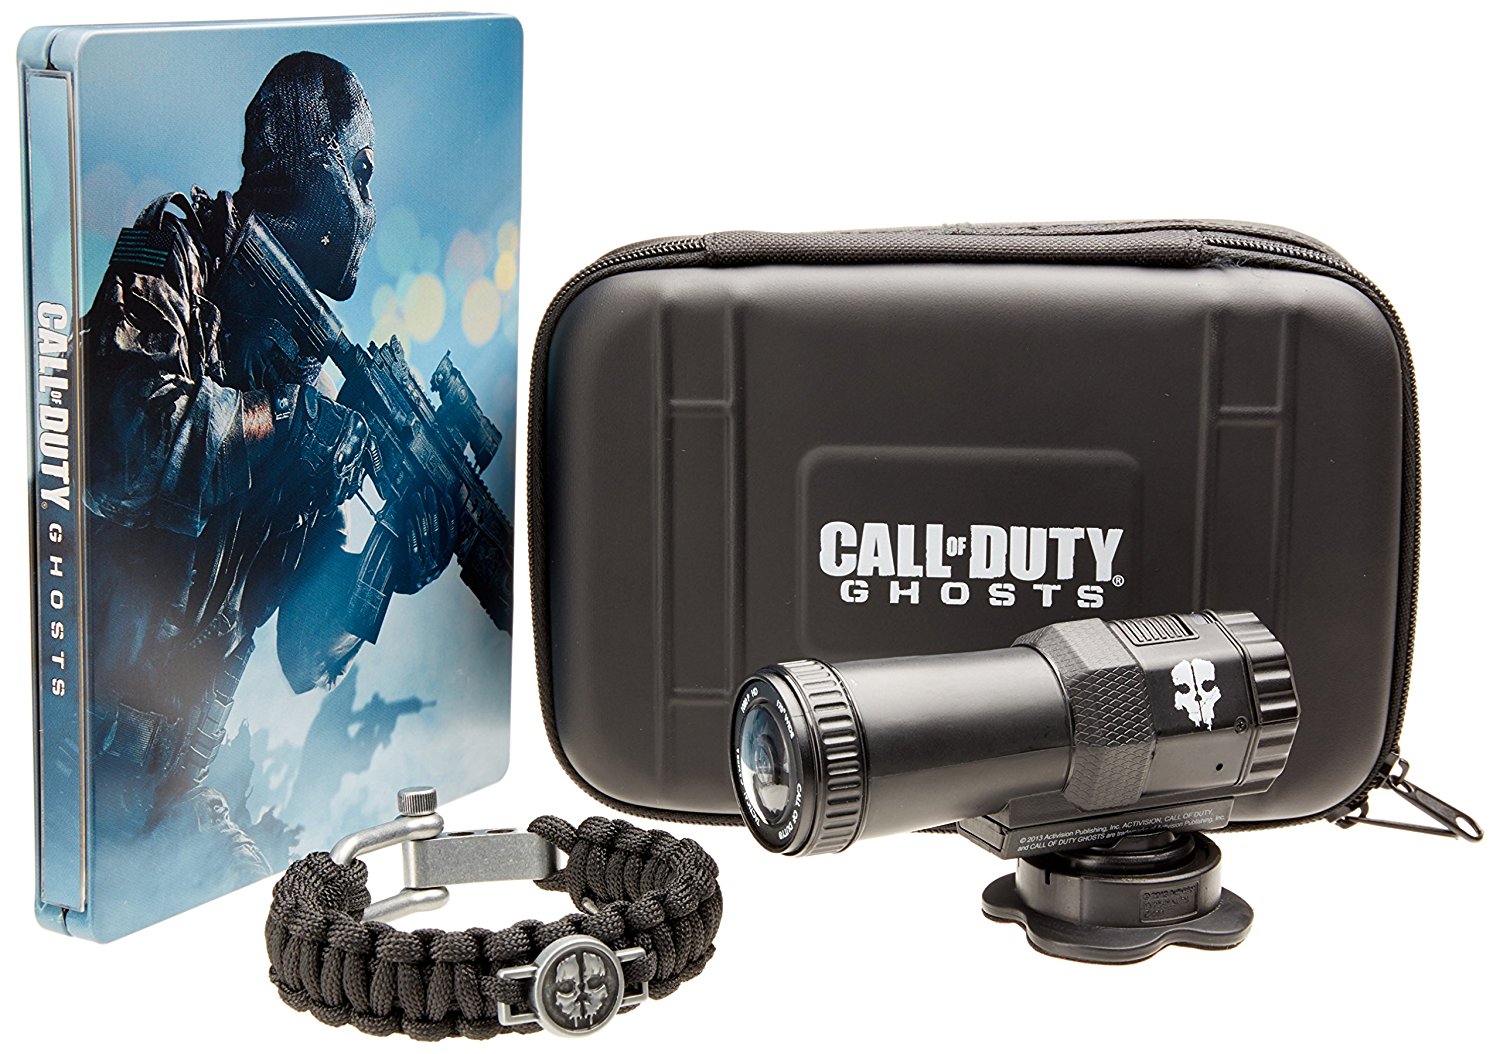 Call of Duty Ghosts prestige edition PS3